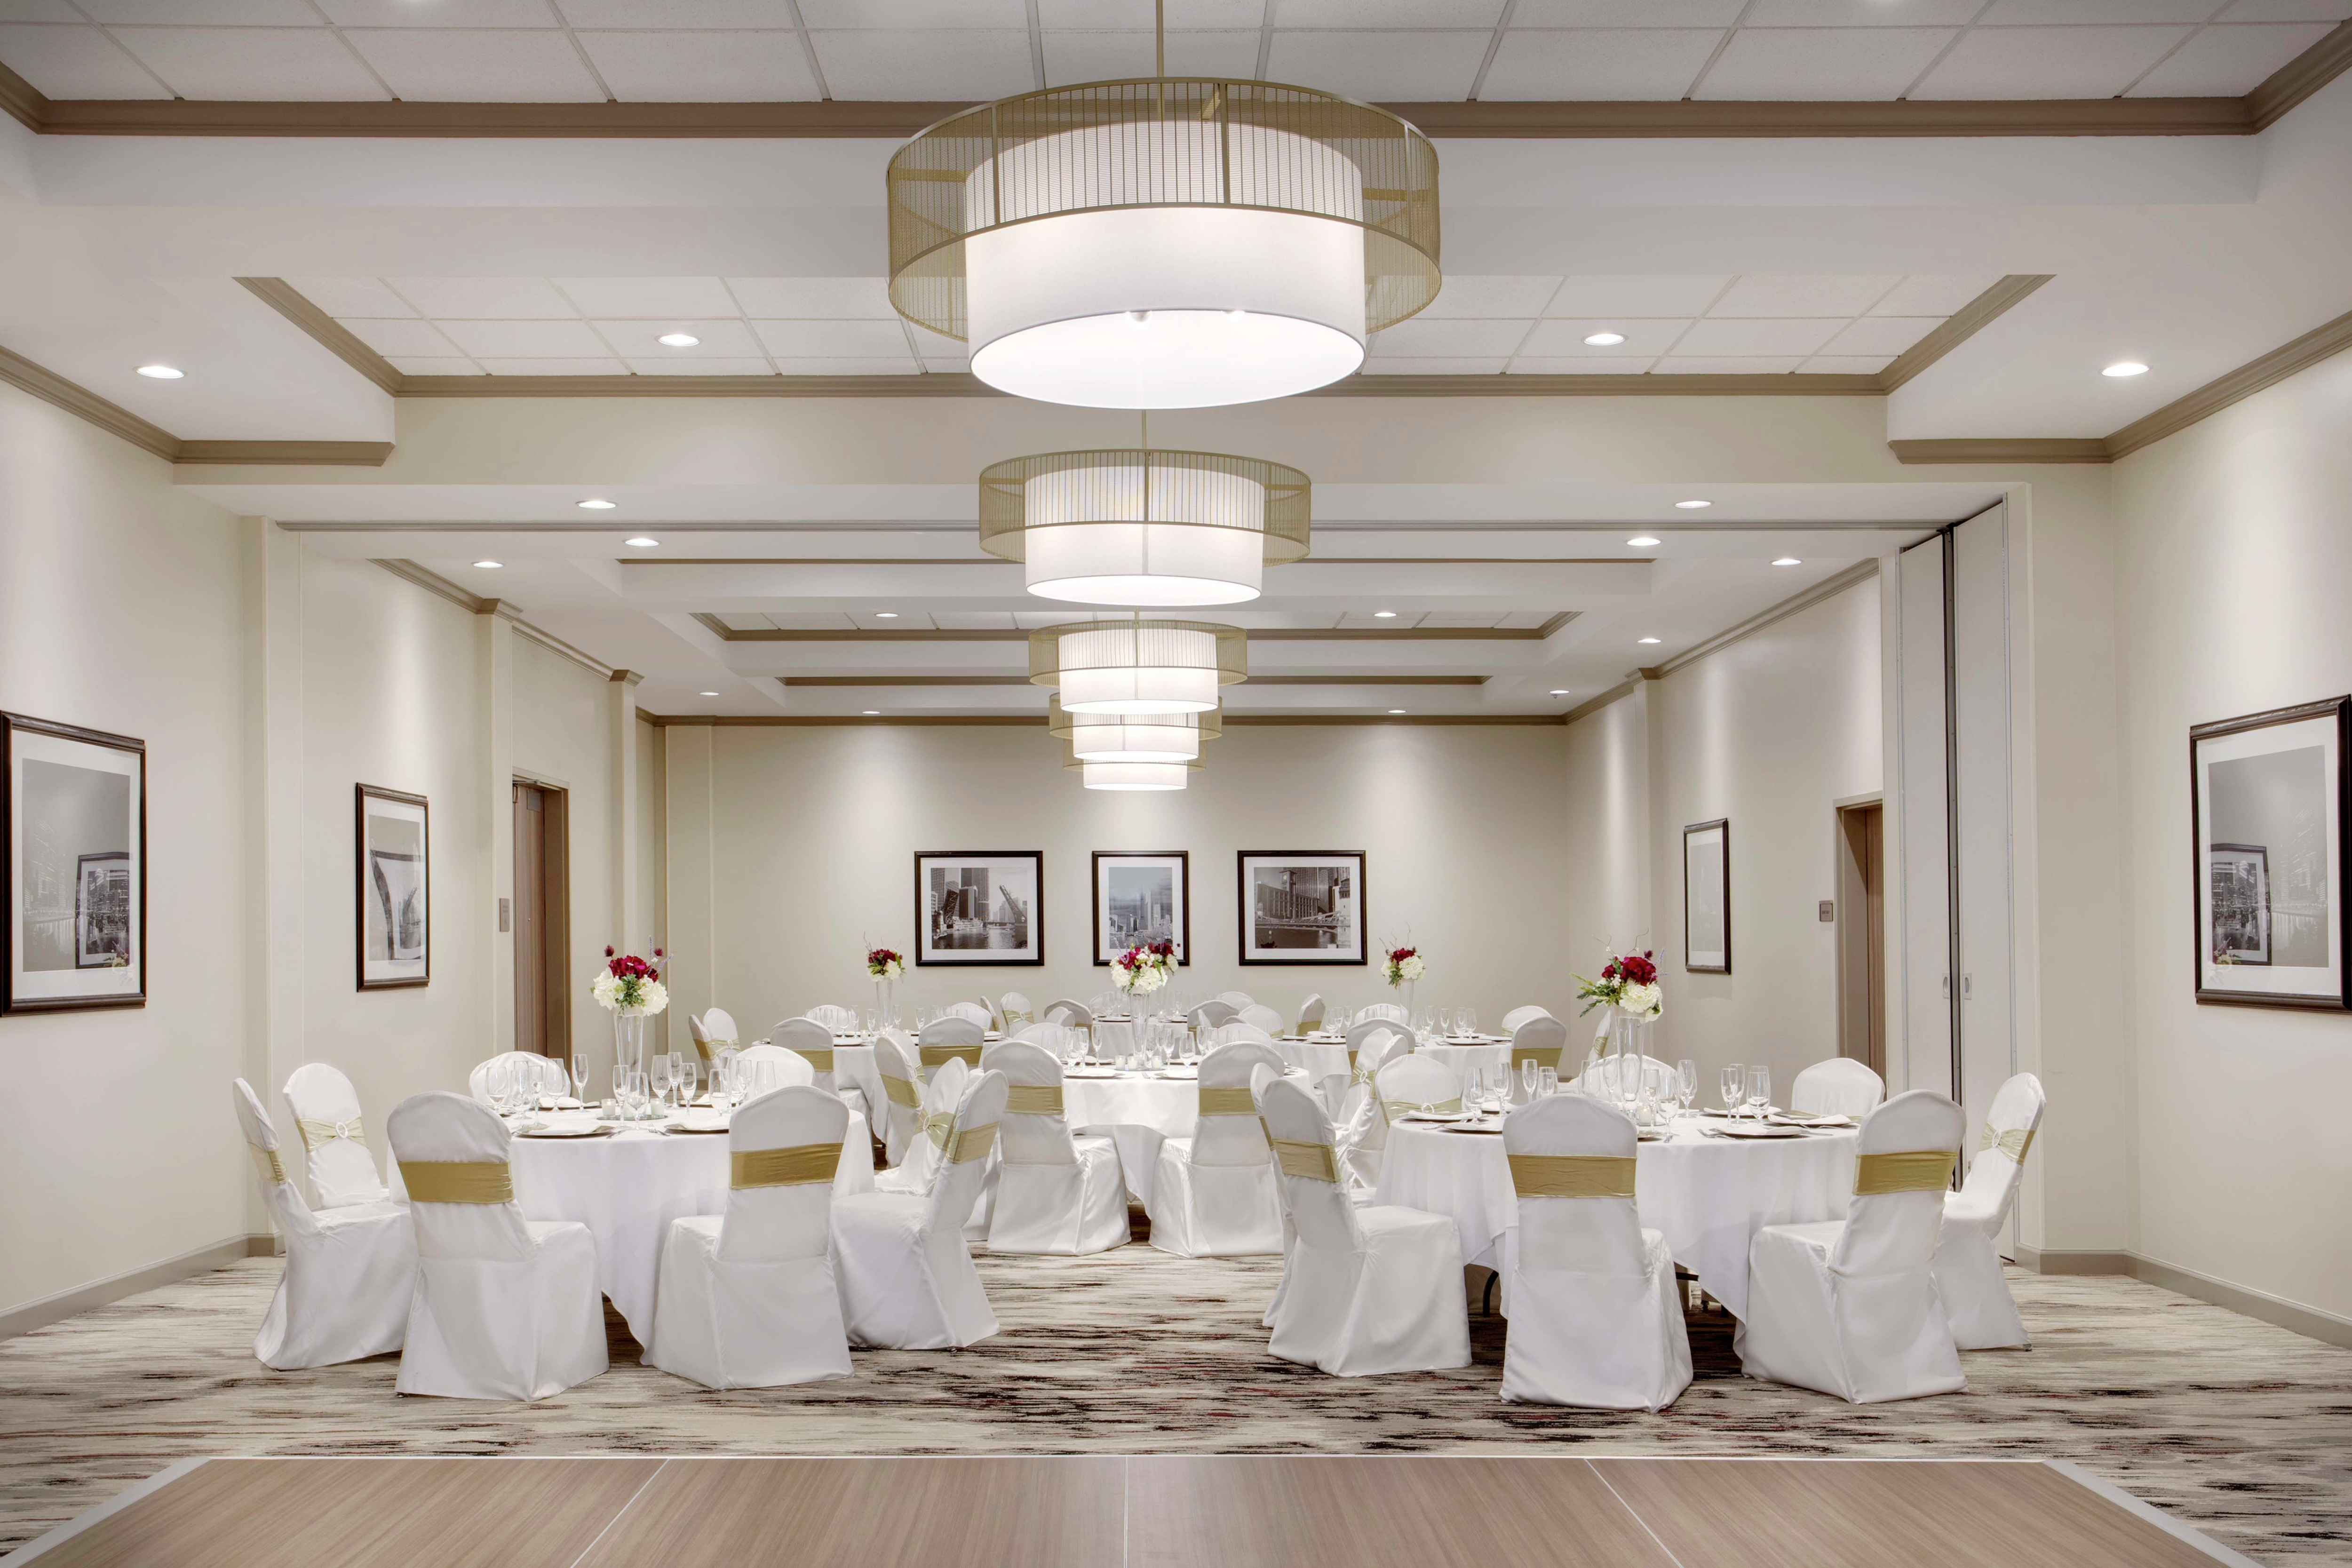 white covered chairs and round banquet tables in a meeting room